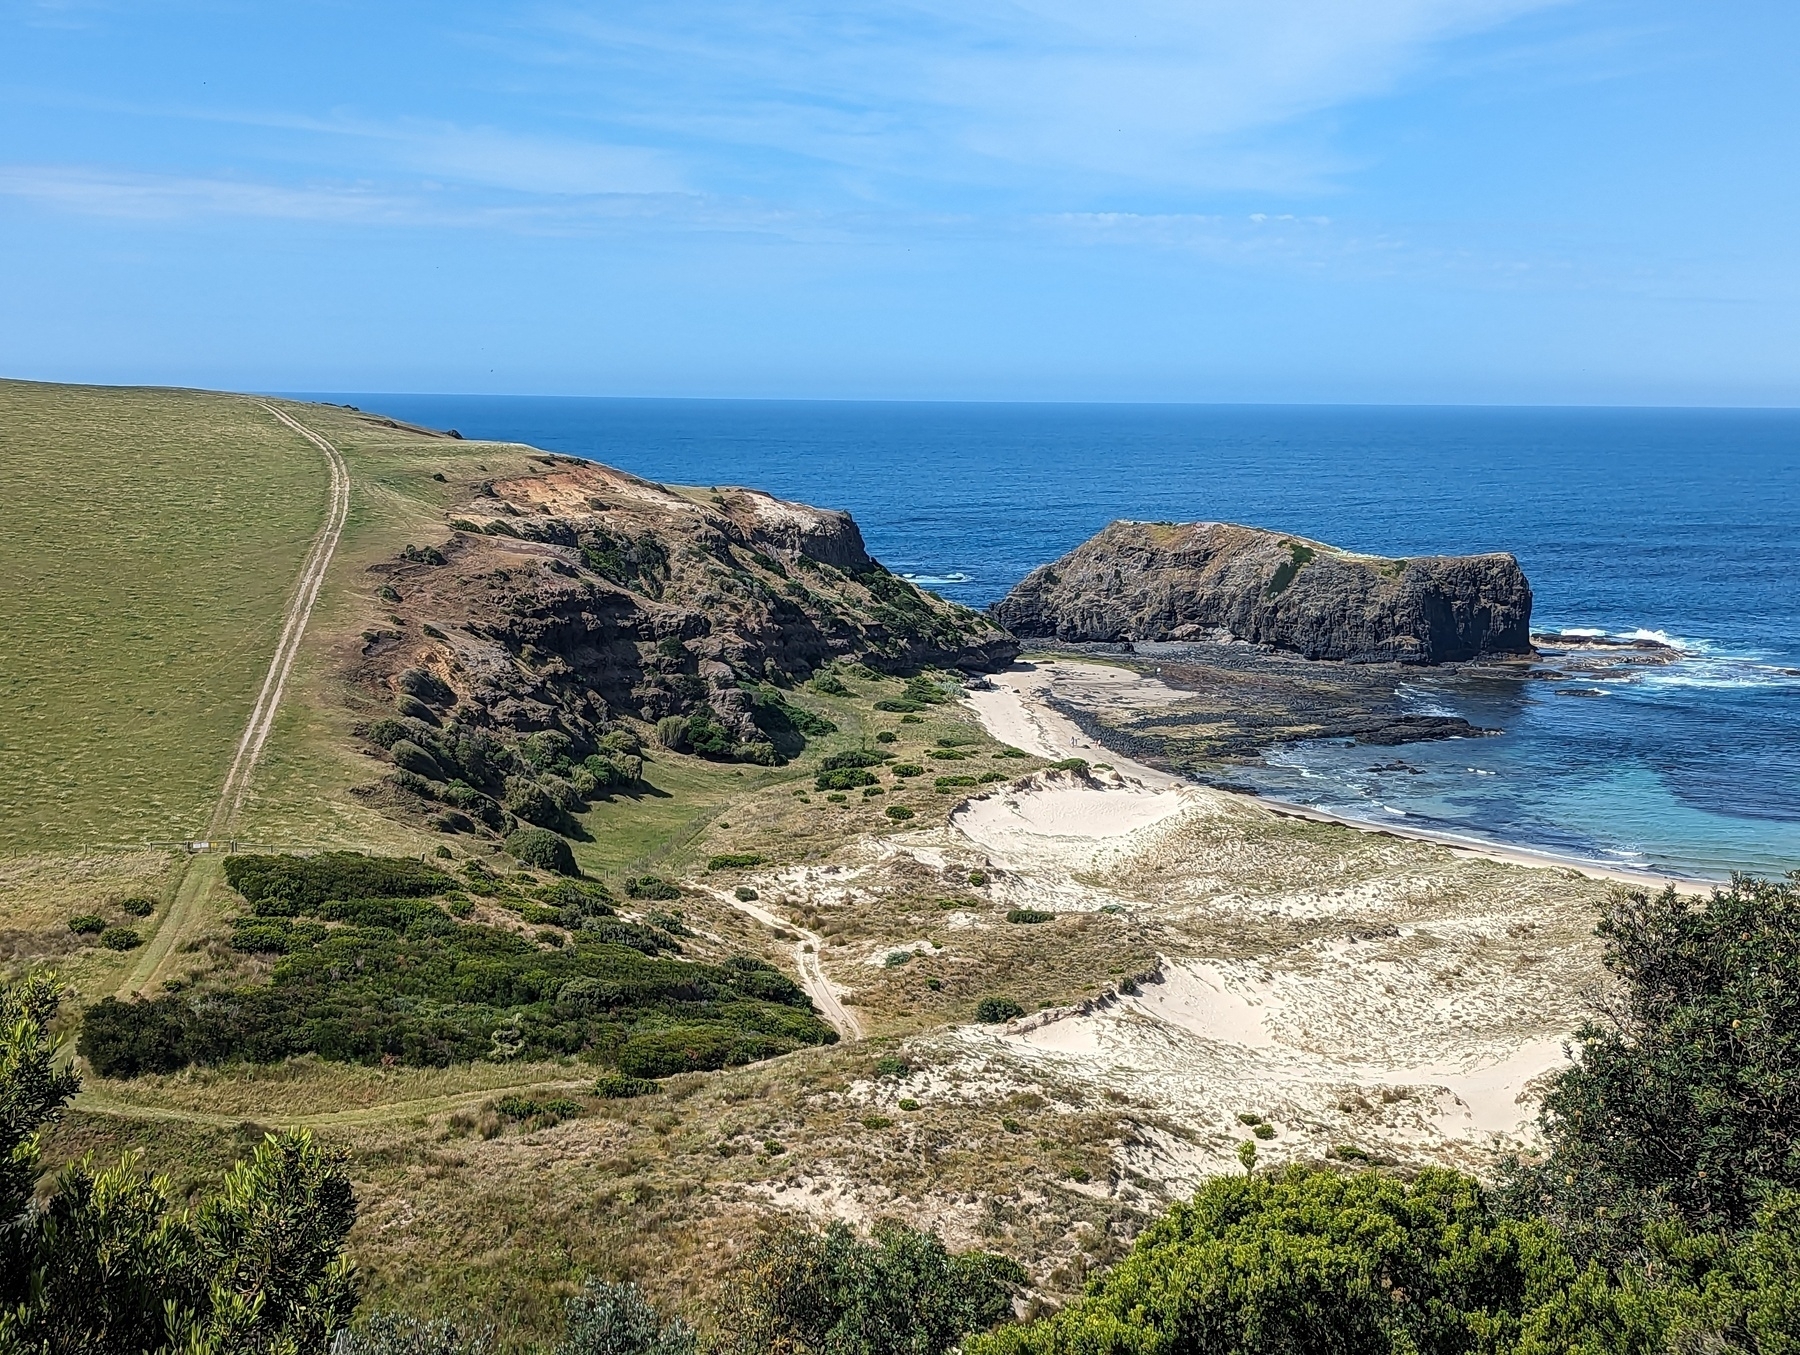 An elevated photo of a beach with the sea on the right, a cliff in front, a road going along the ridge, and a green field on the left